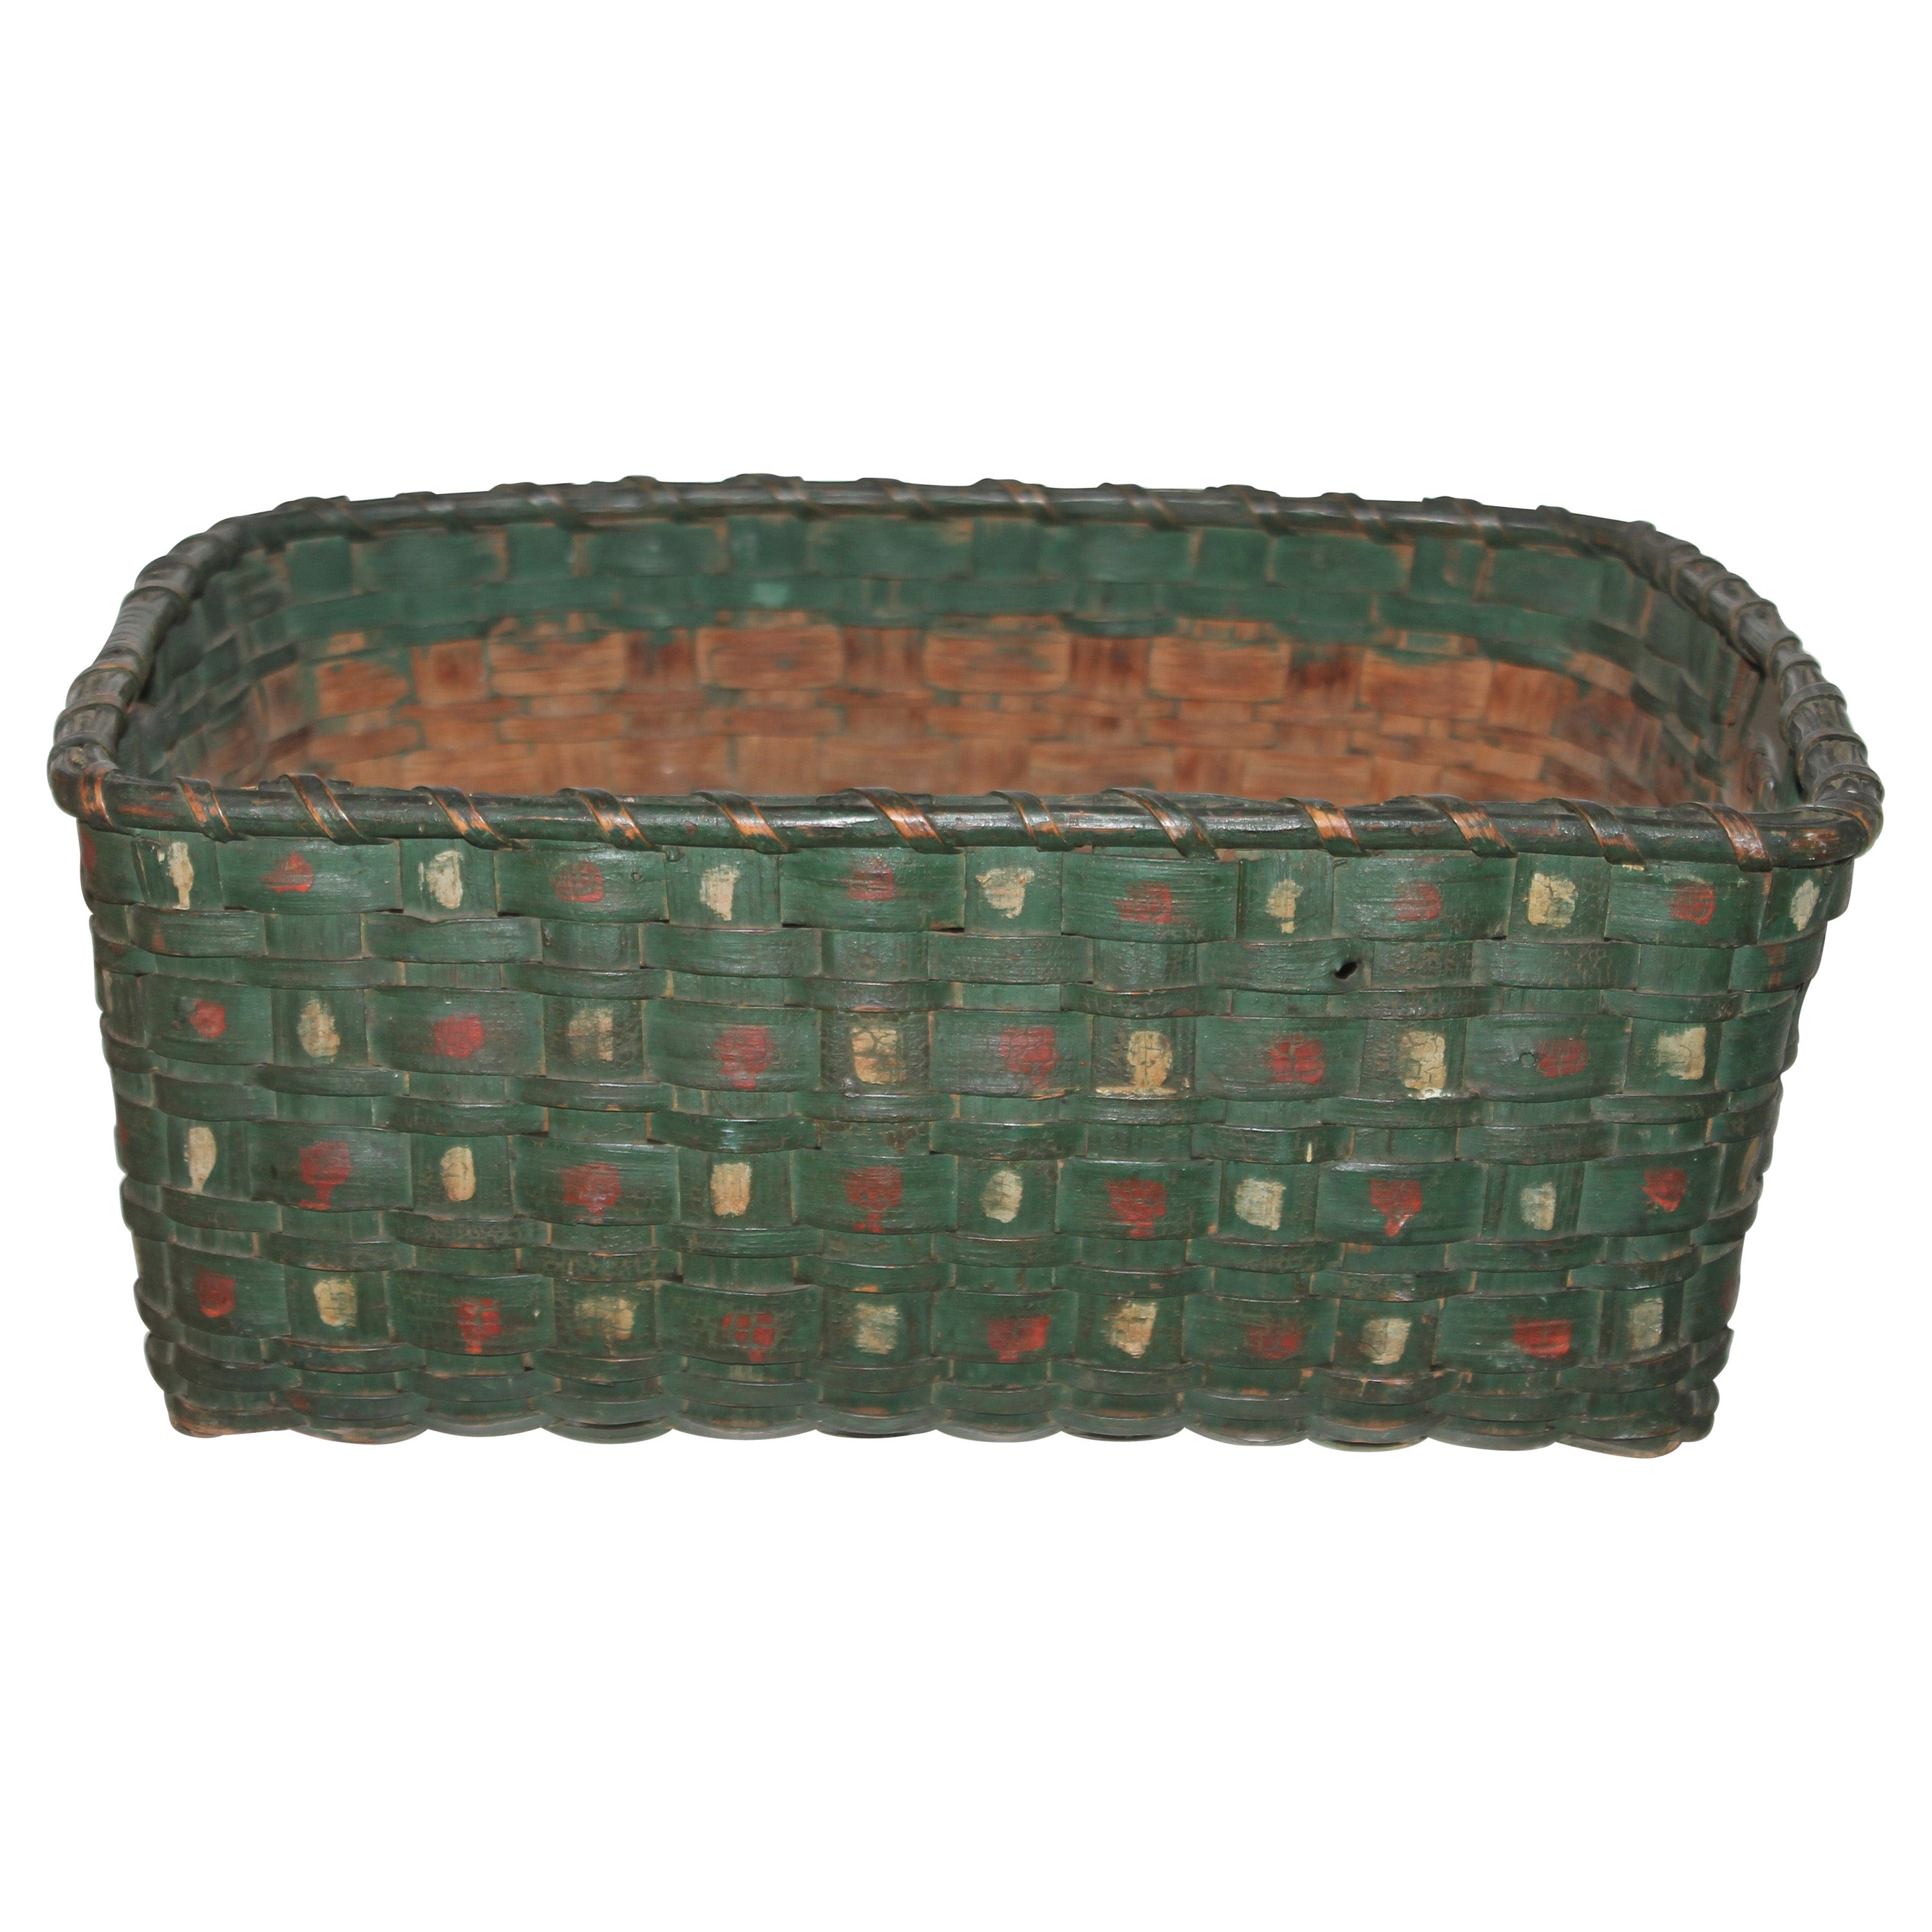 19thc Paint Decorated Double Handled Basket